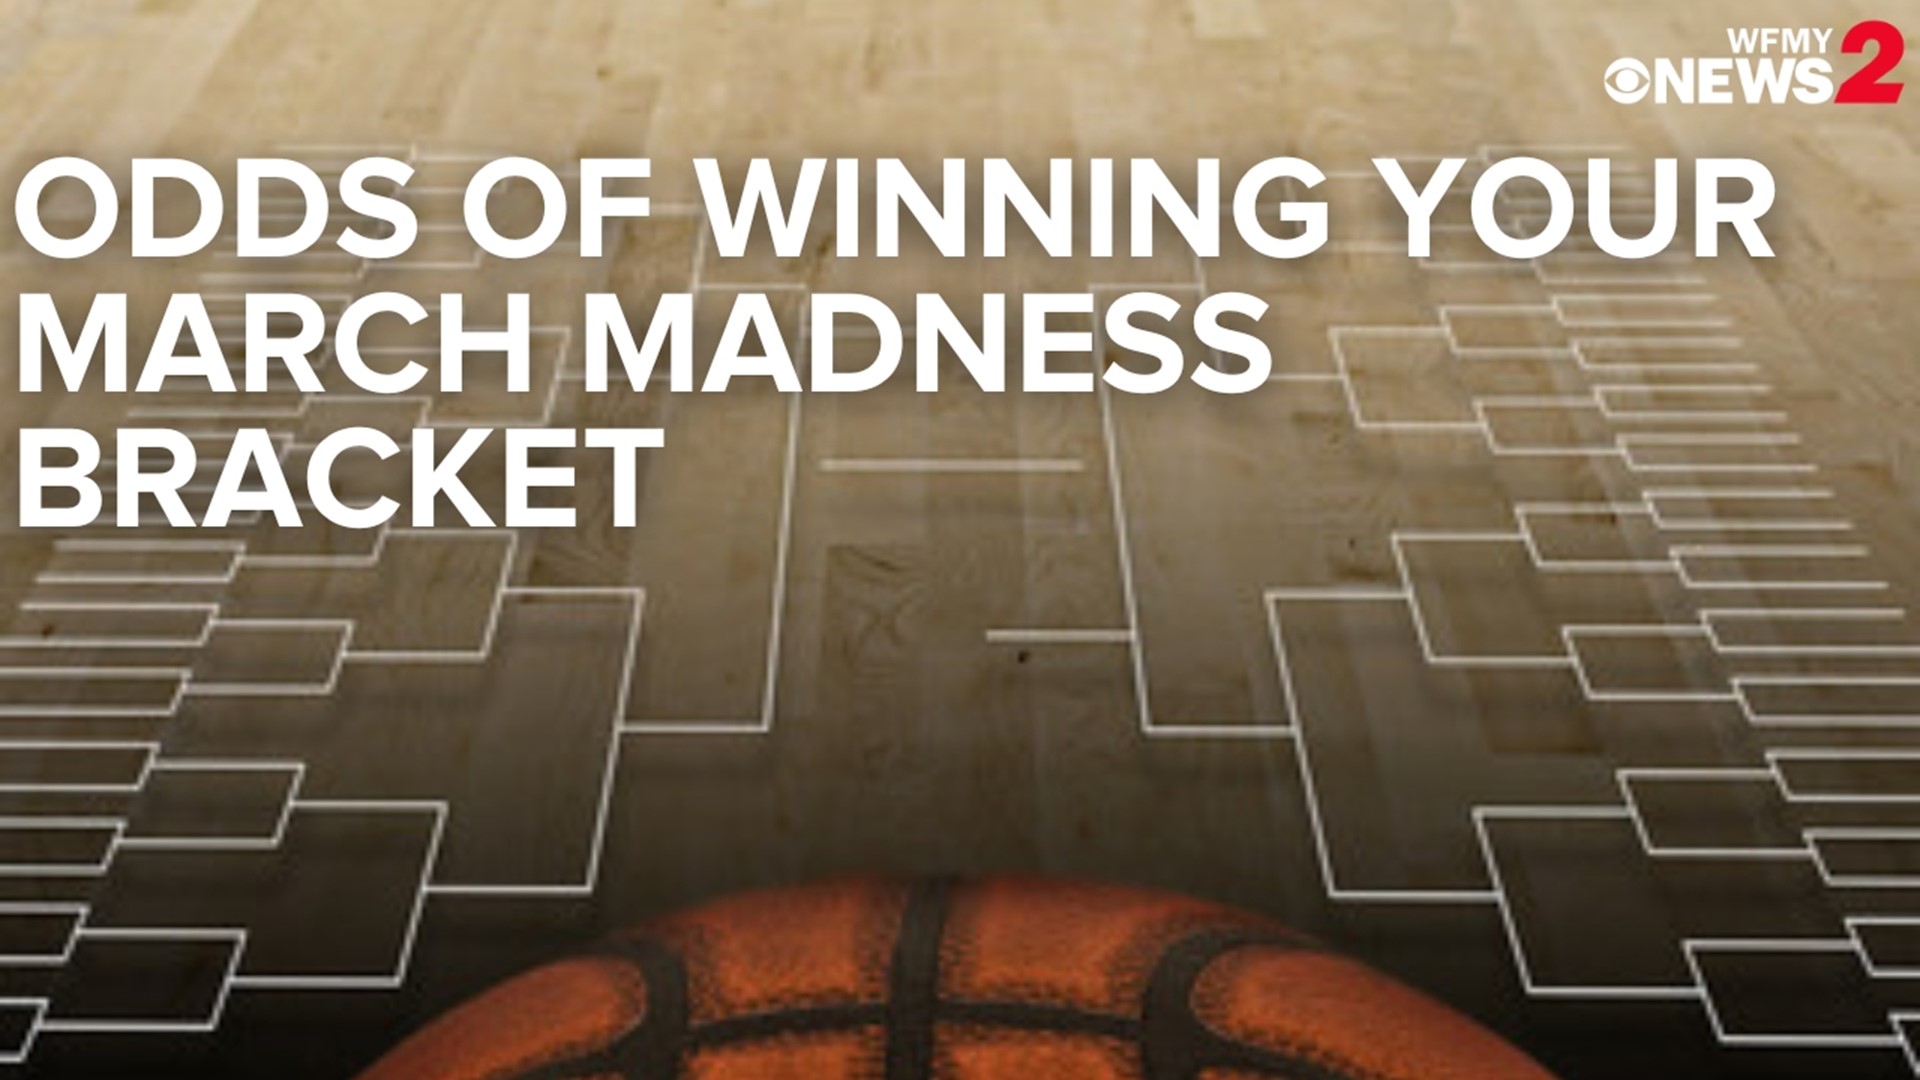 You only have a one in 9.2 quintillion chance of predicting the perfect March Madness bracket. You’ve got an even better chance of winning the lottery!